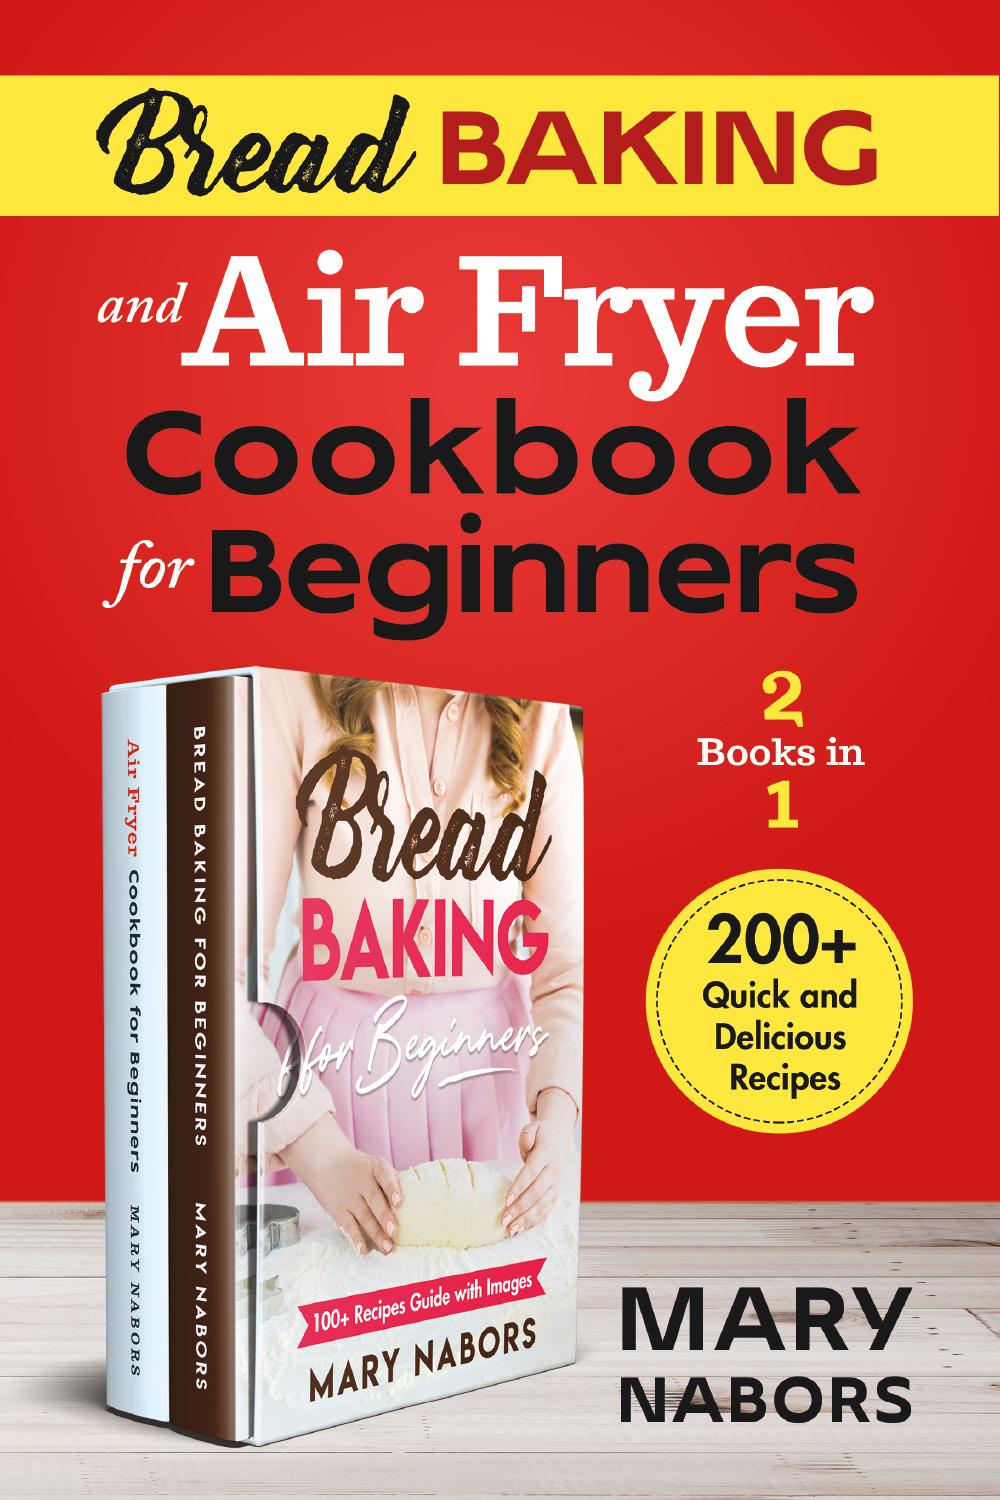 Bread Baking and Air Fryer Cookbook for Beginners (2 Books in 1). 200+ Quick and Delicious Recipes